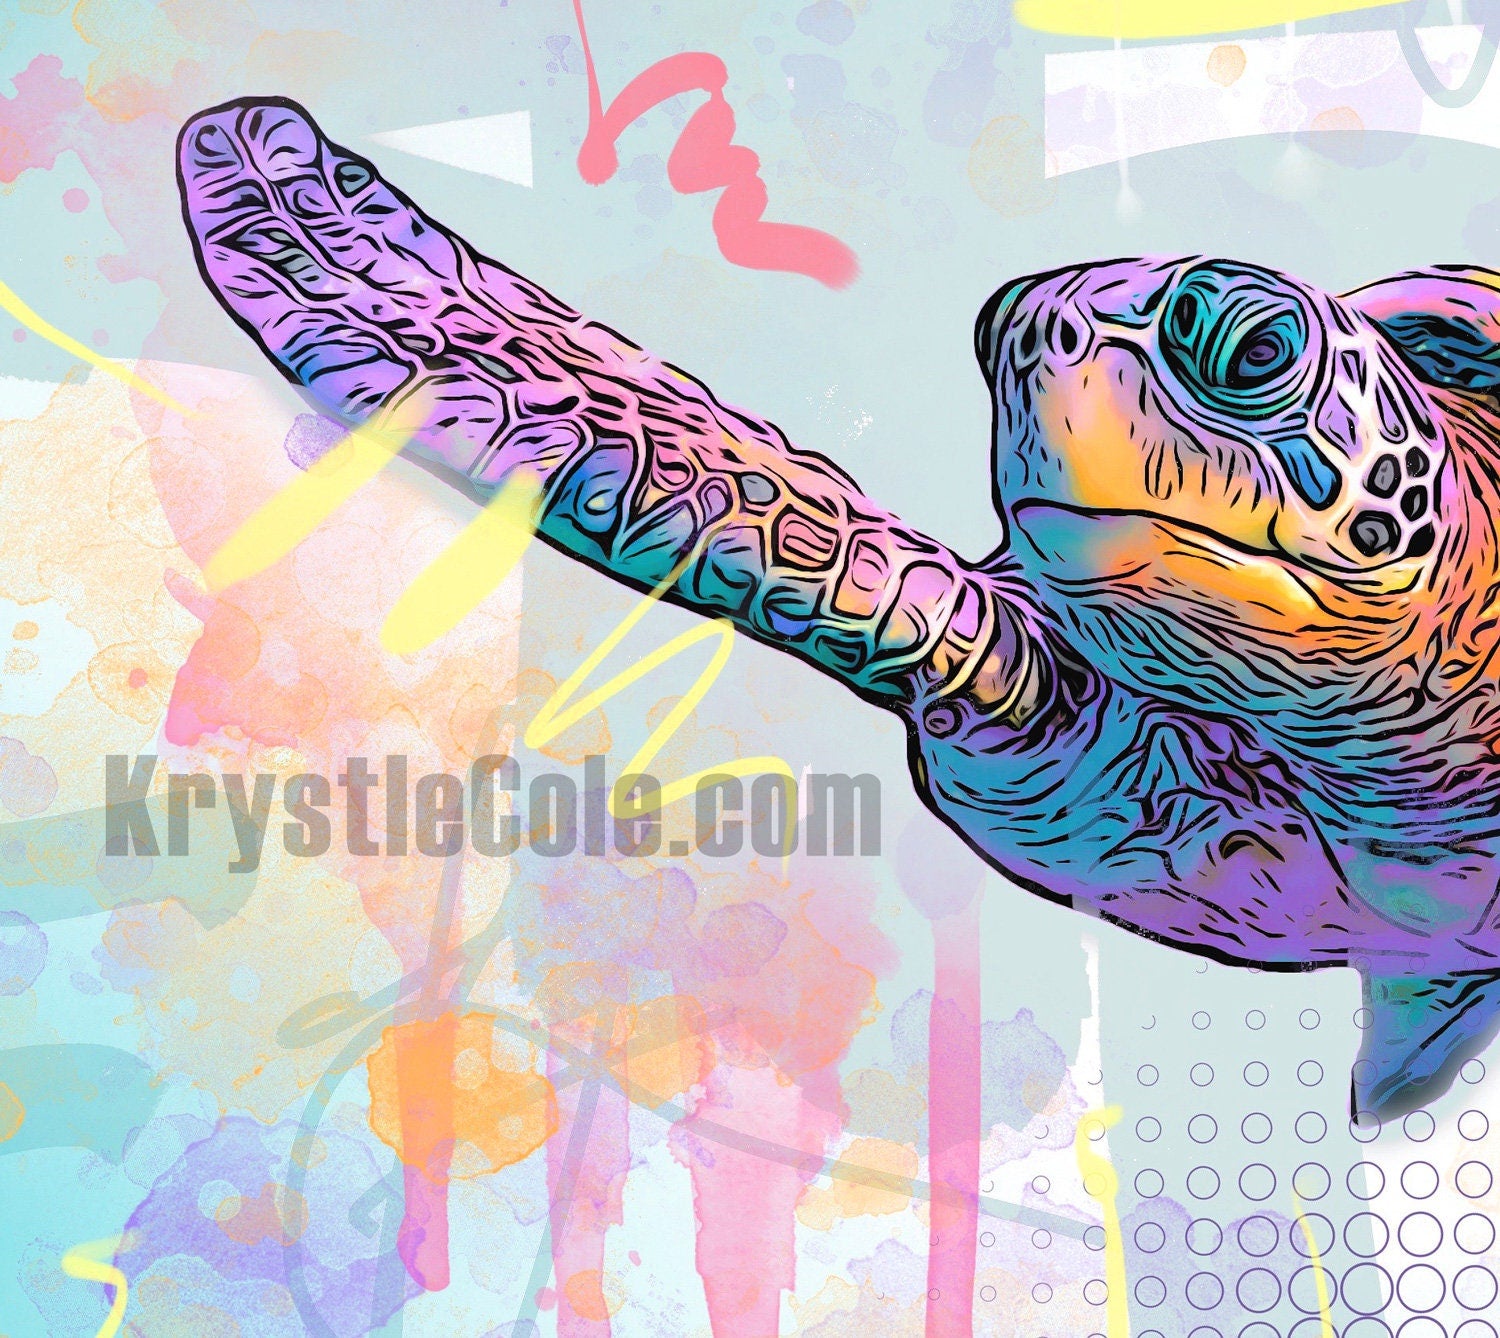 Sea Turtle Art Print on CANVAS or PAPER for Wall Decor or Gifts. Original Artwork by Krystle Cole *Each Print Hand Signed*